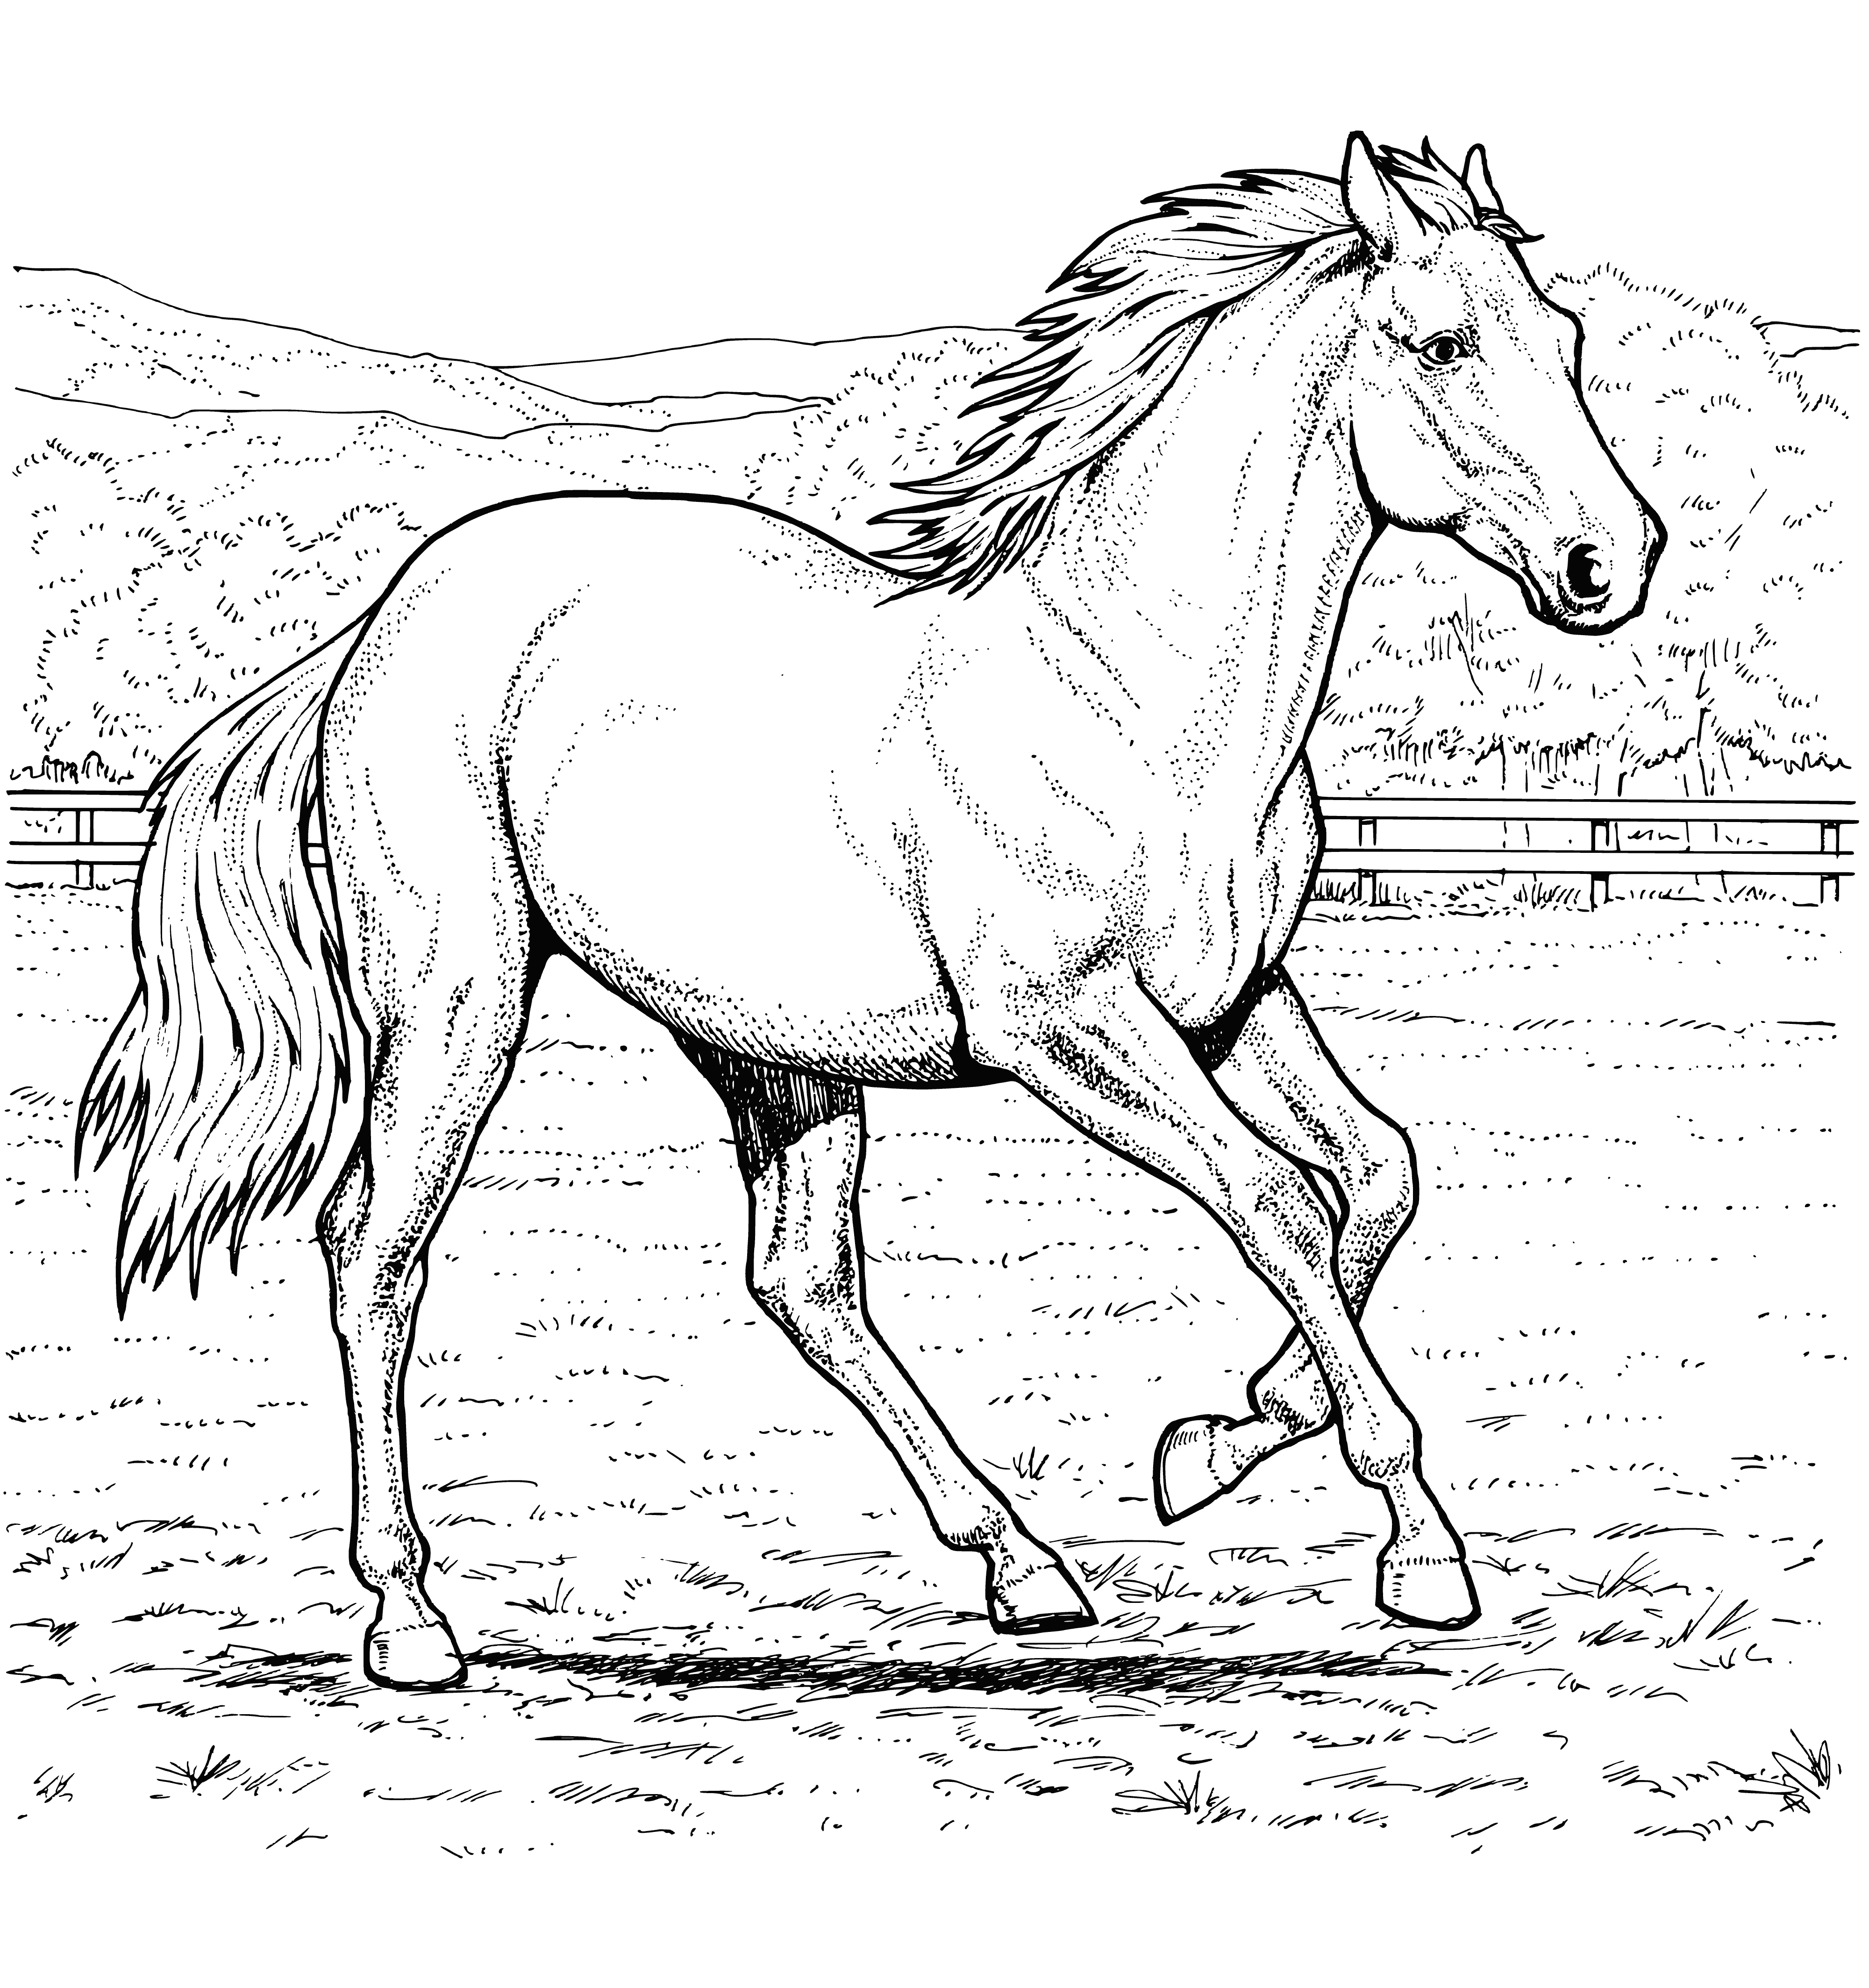 coloring page: Standing in a field, alert horse has dark coat & light mane/tail. Left front hoof raised on large round rock. Ears perked forward & head turned left.